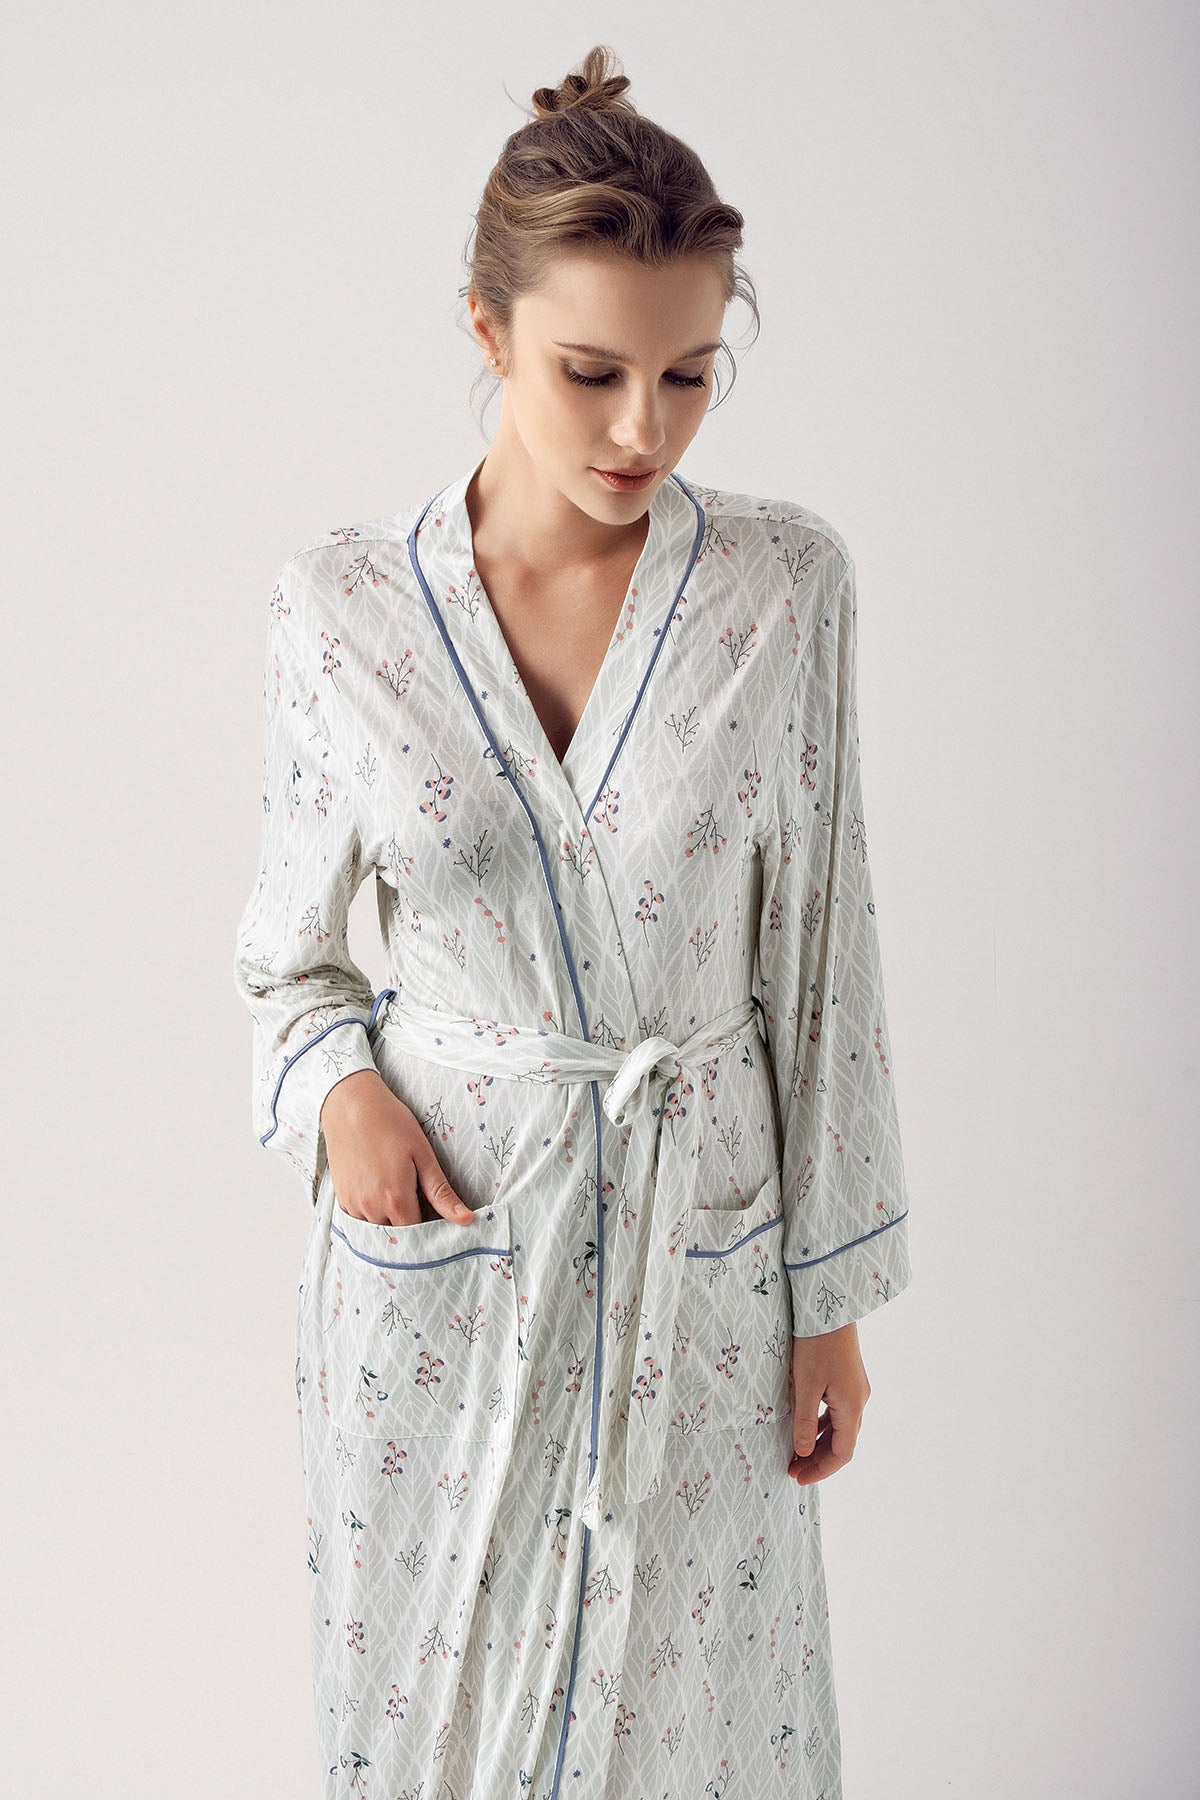 Patterned Maternity Robe Green - 14501